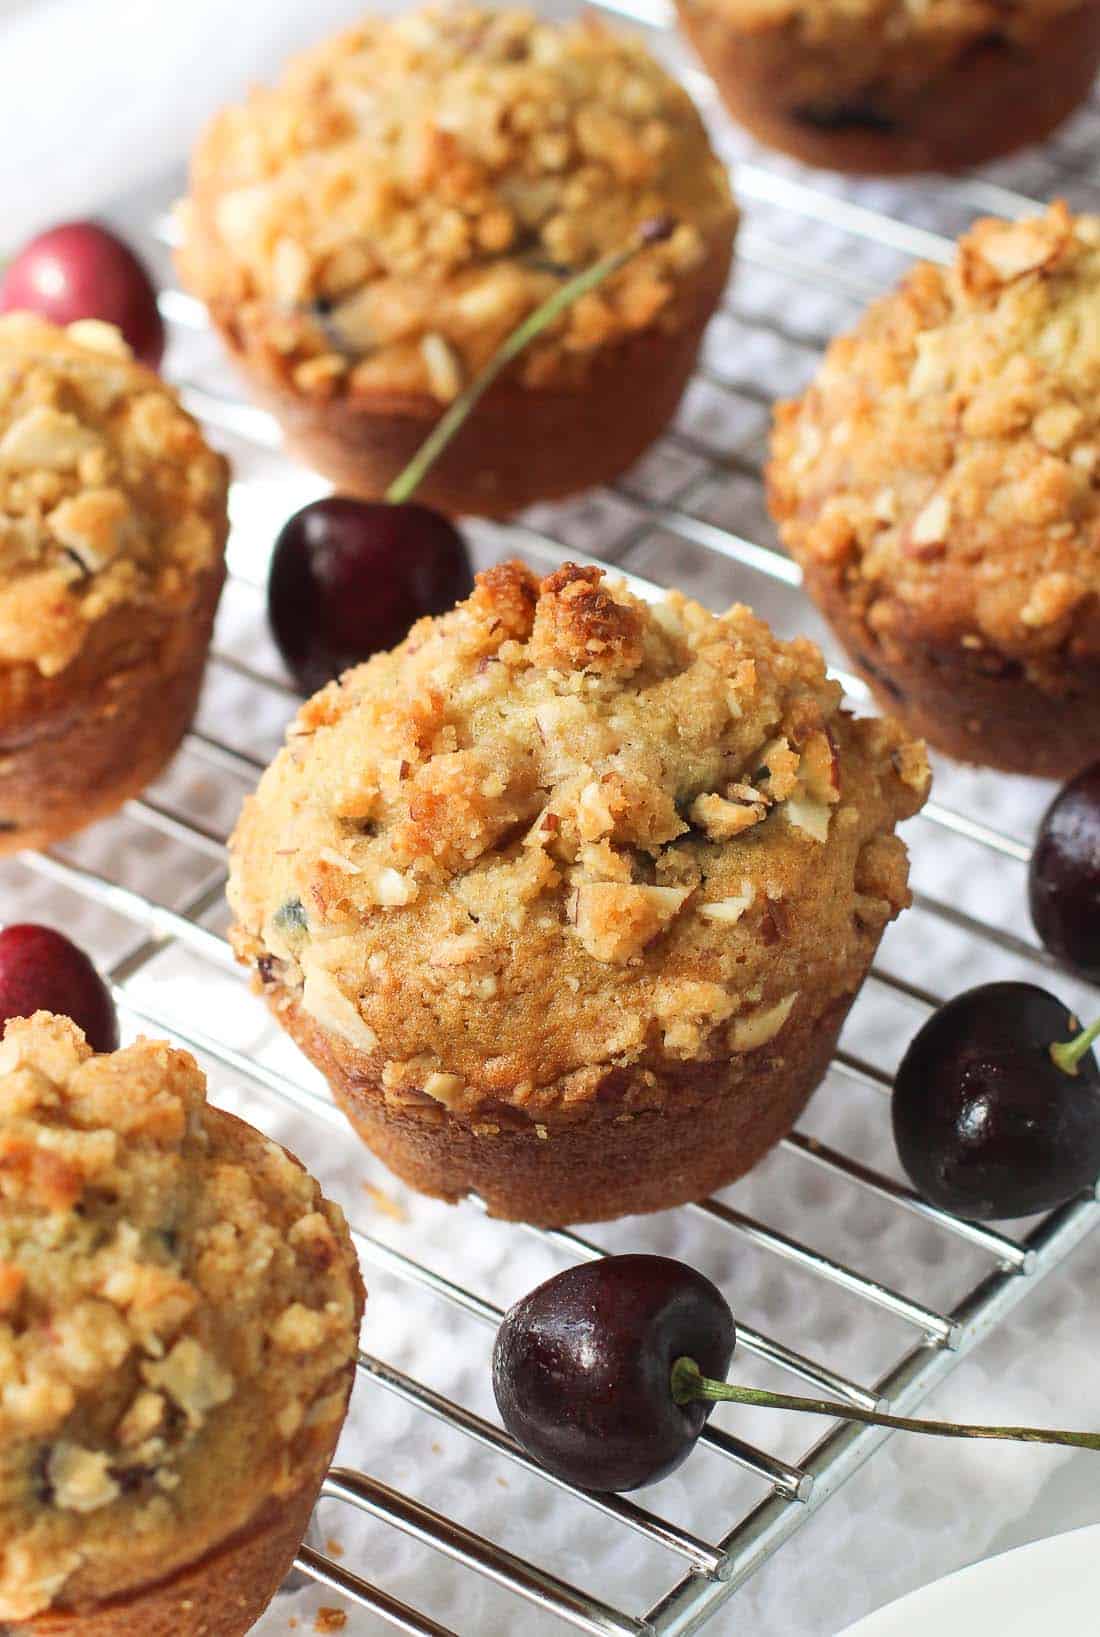 Cherry almond muffins on a wire rack surrounded by fresh cherries